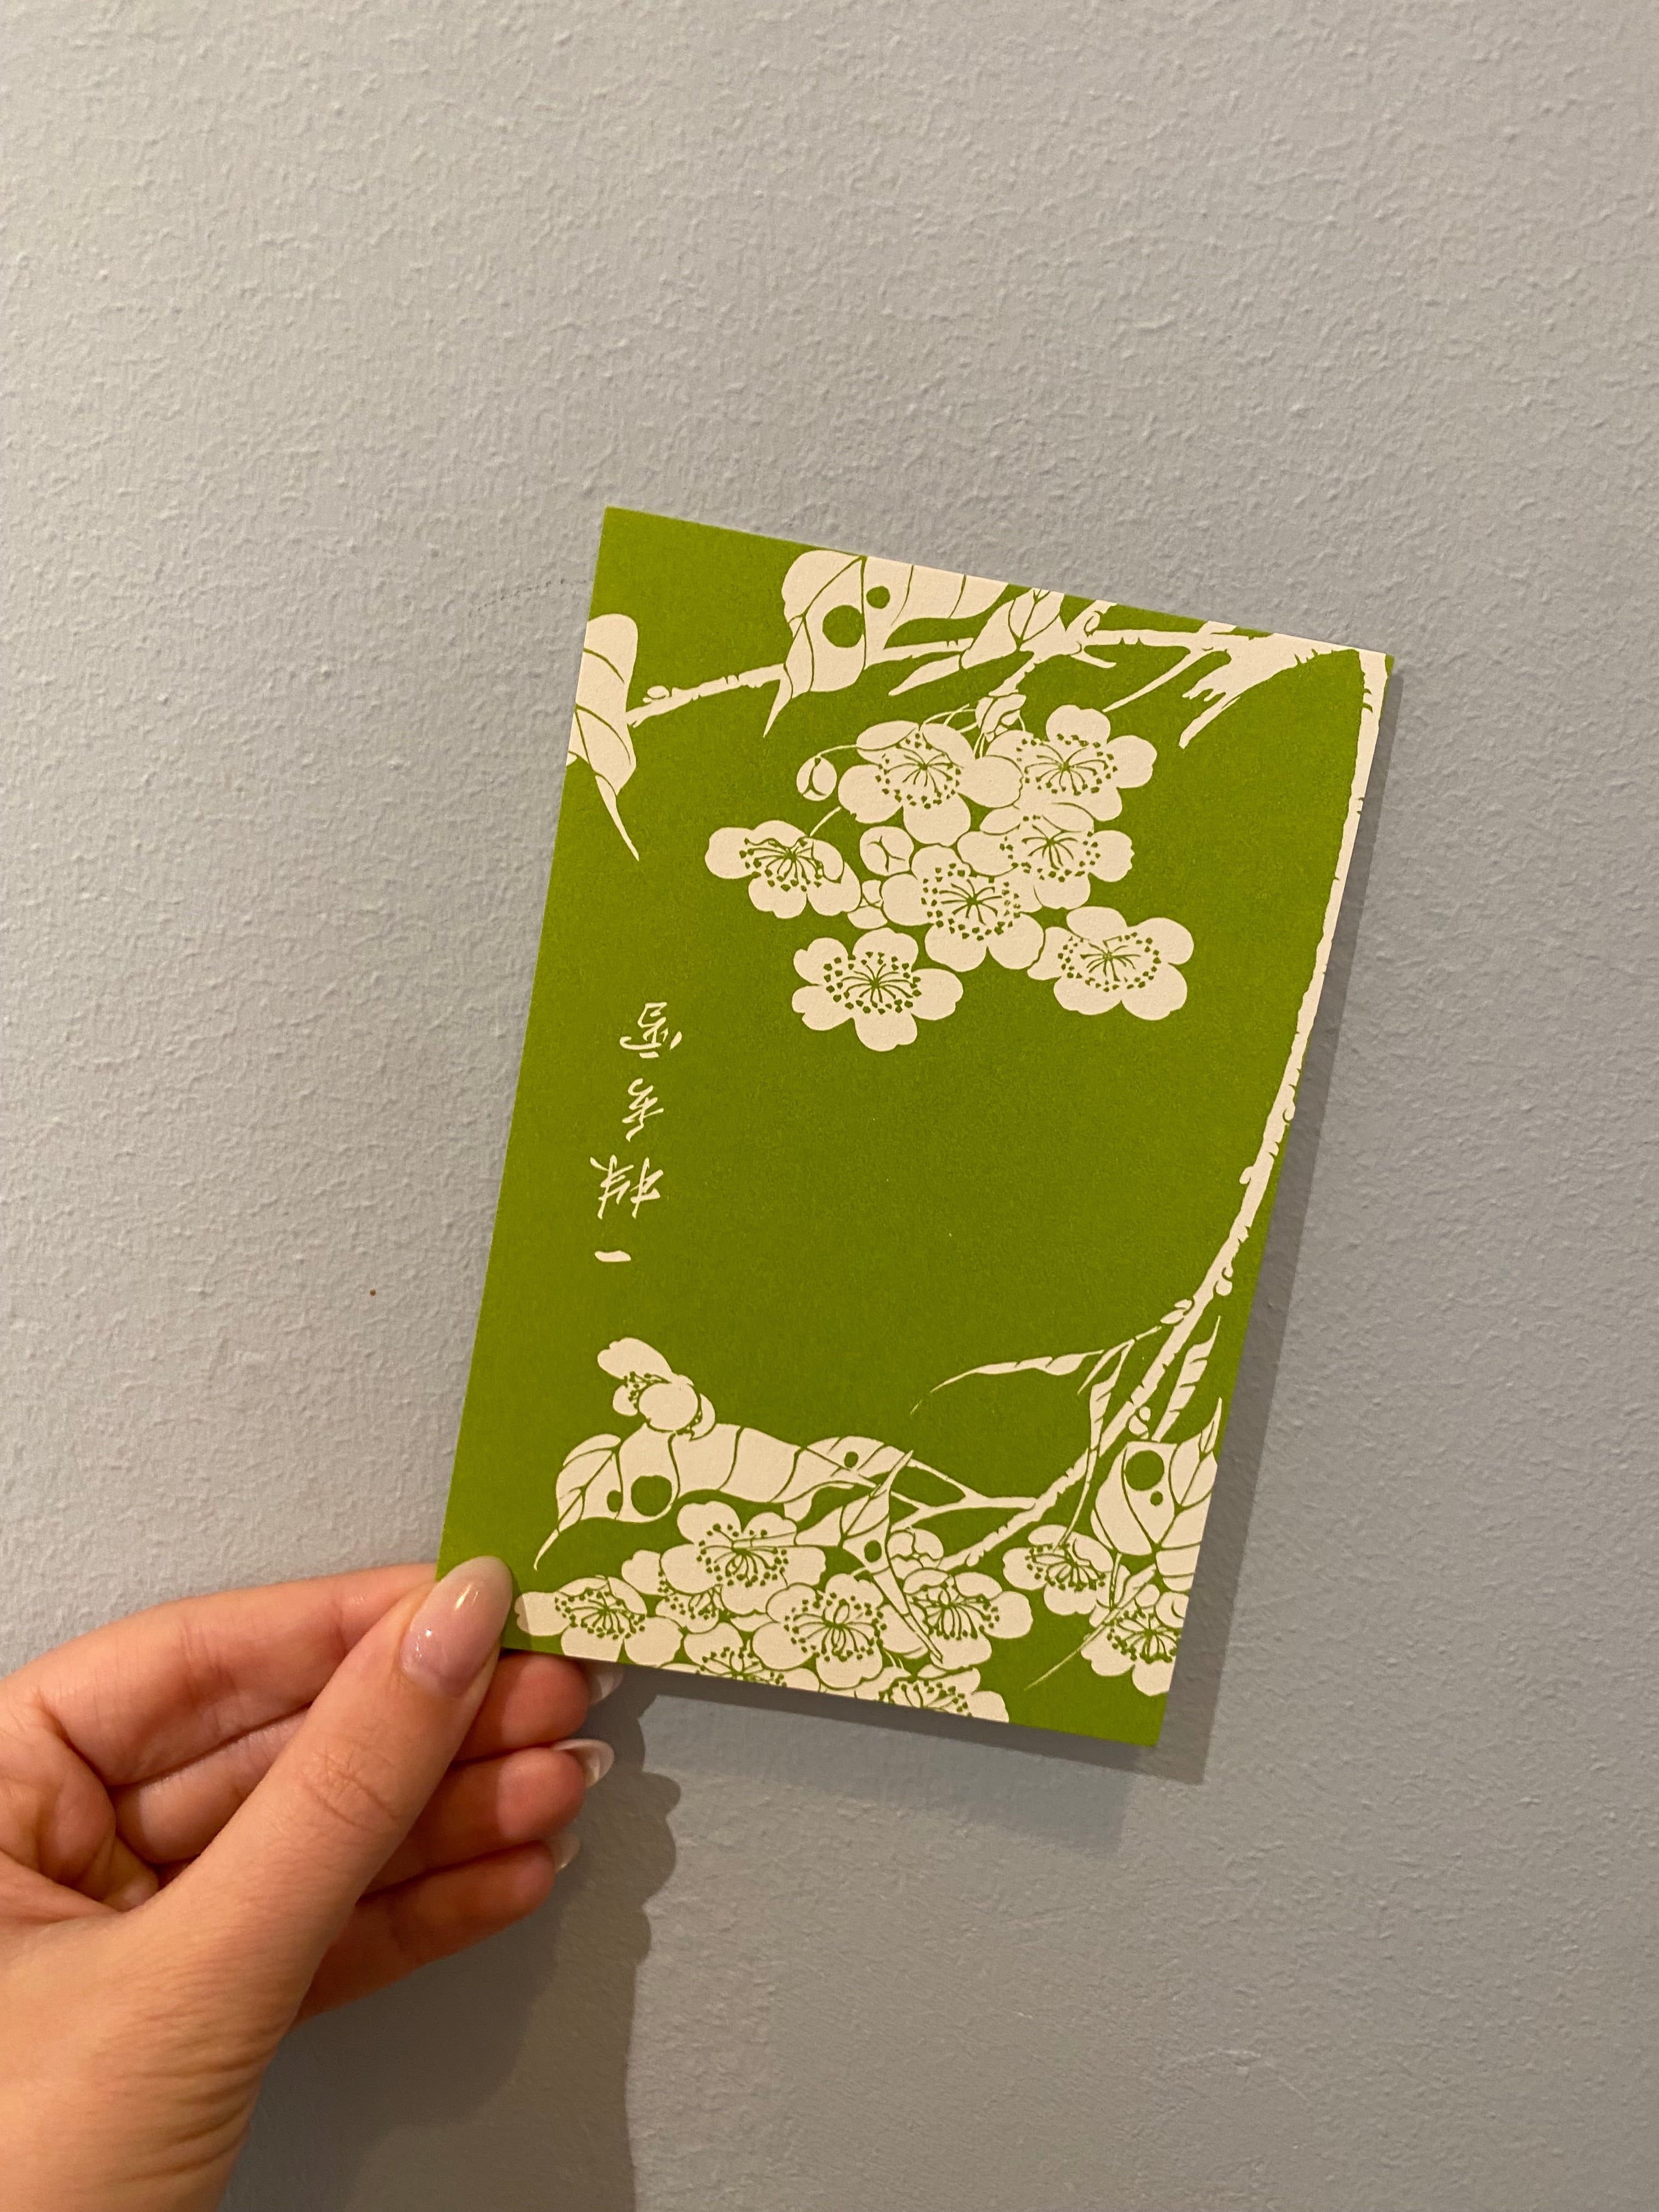 Card with white flowers on a green background